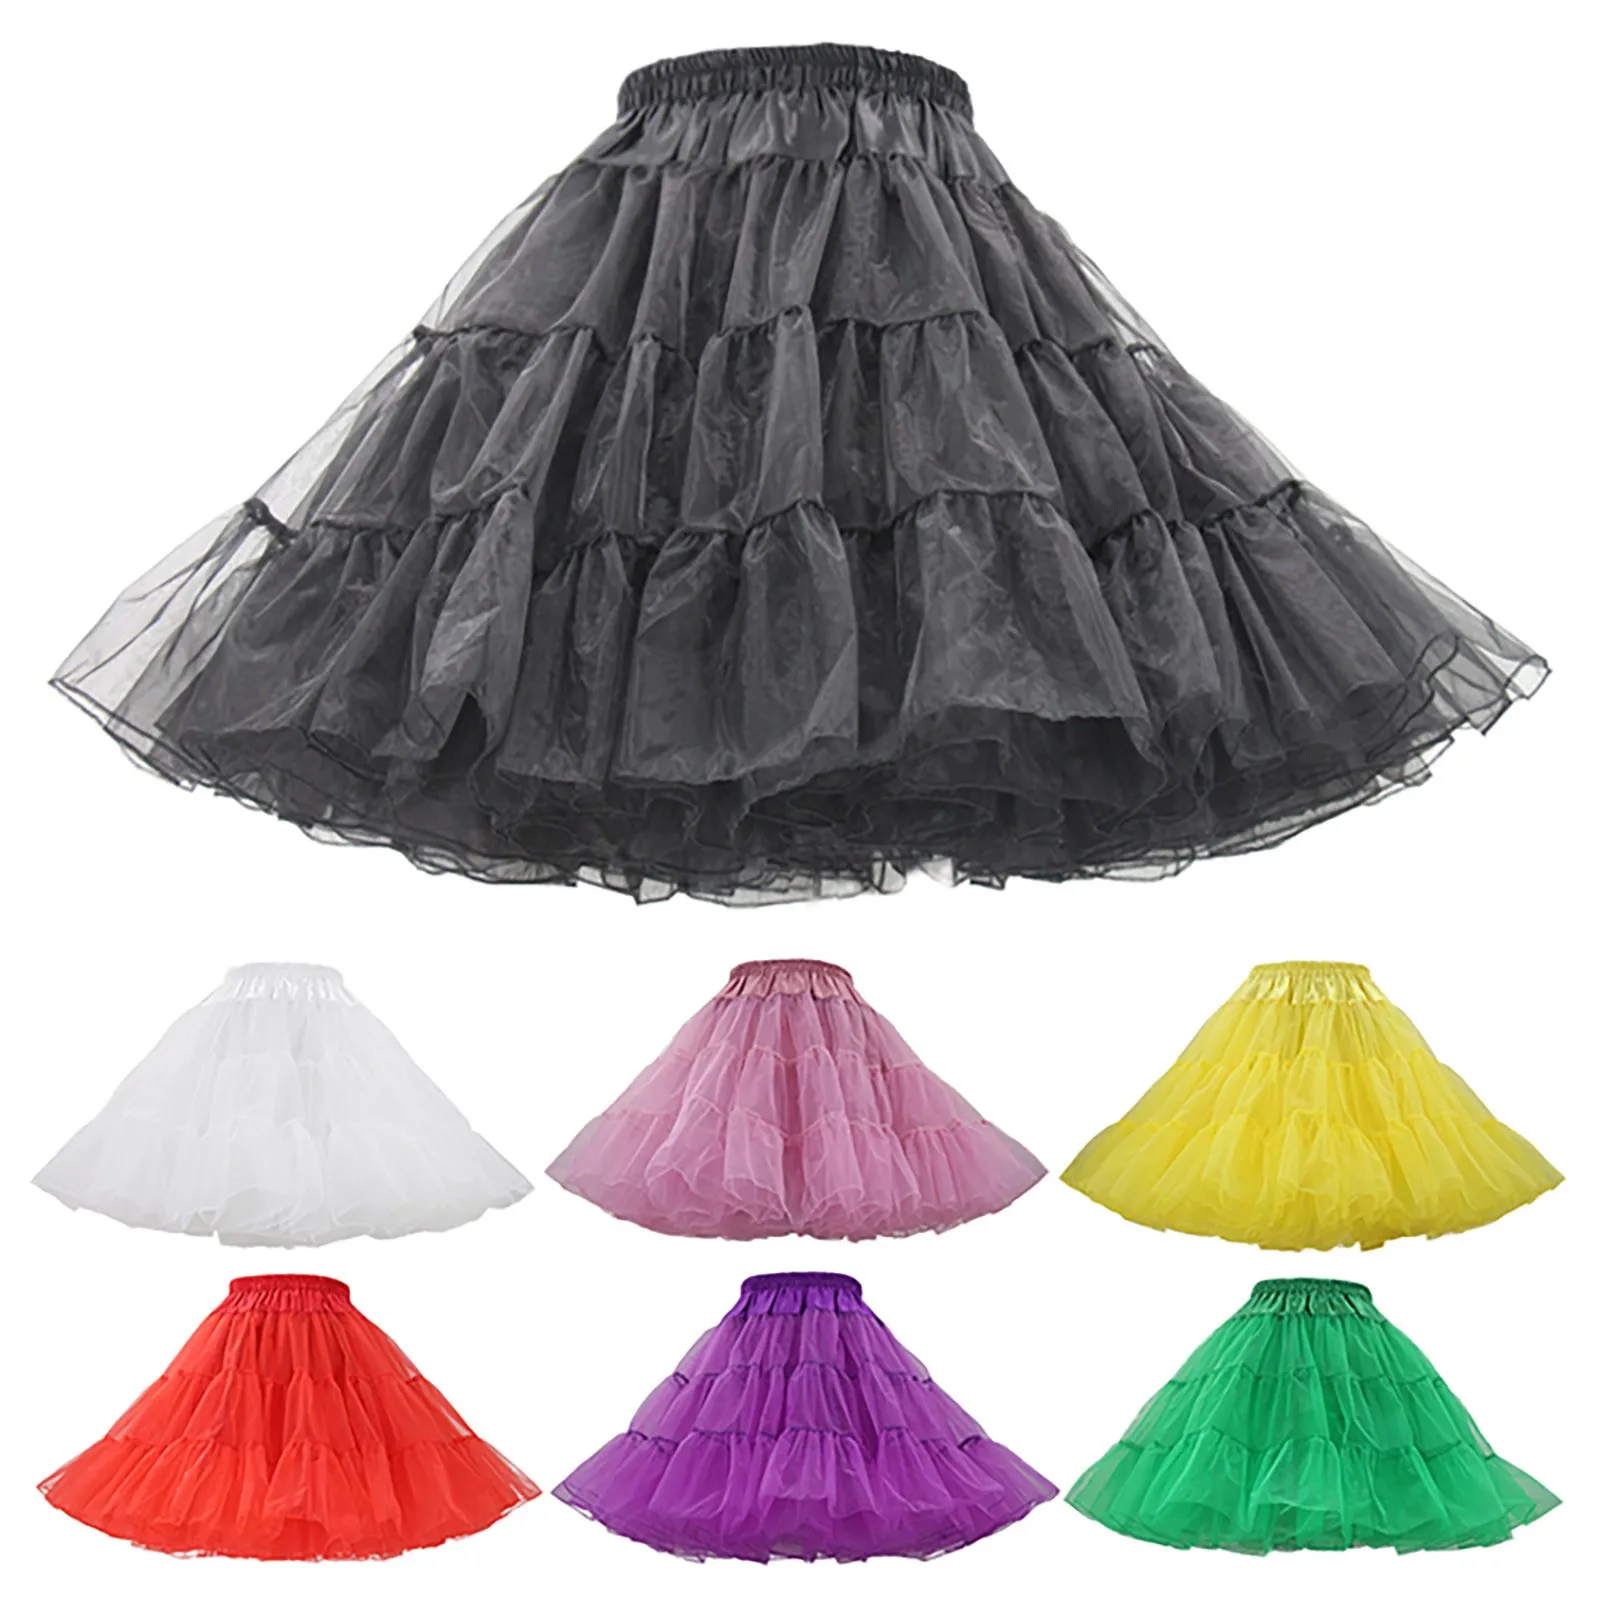 

omen'S Candy Color Multicolor Skirt Support Half Body Puff Petticoat Colorful Small Short Cotton Skirts for Women Heart Skirt